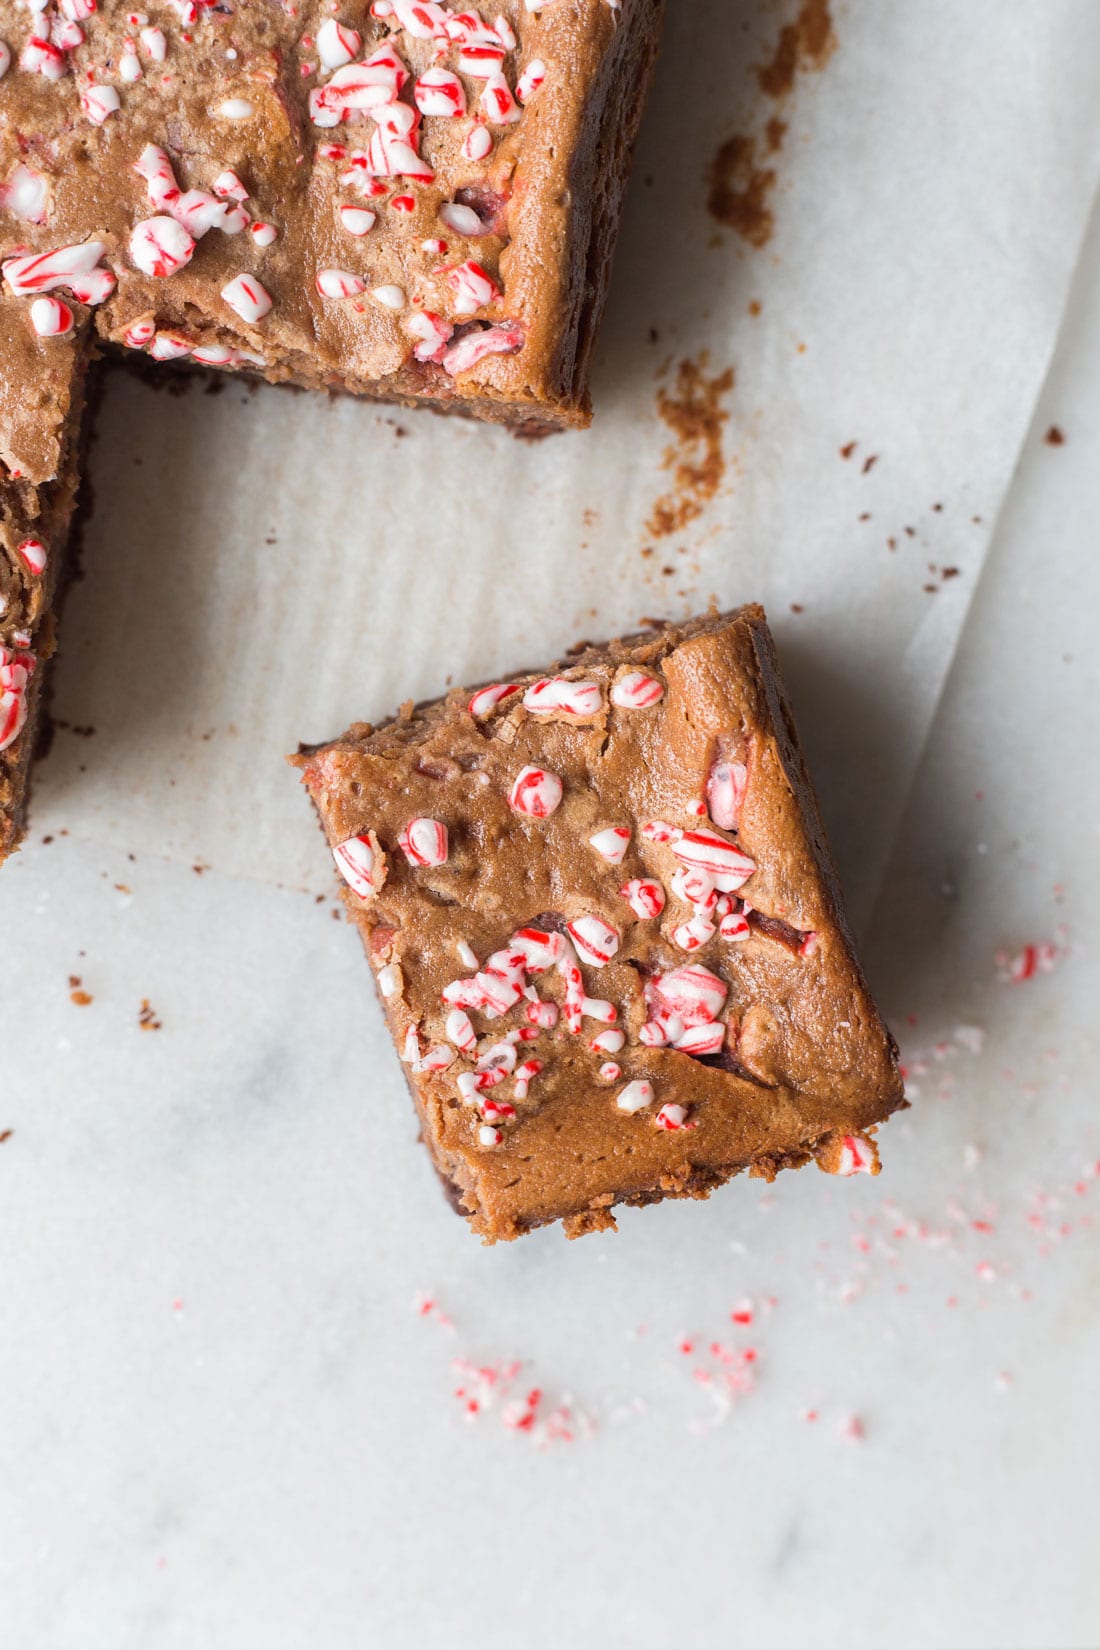 Picture of the top of Miss Jones Baking Co Chocolate Peppermint Butter Bar with chunks of peppermint on top